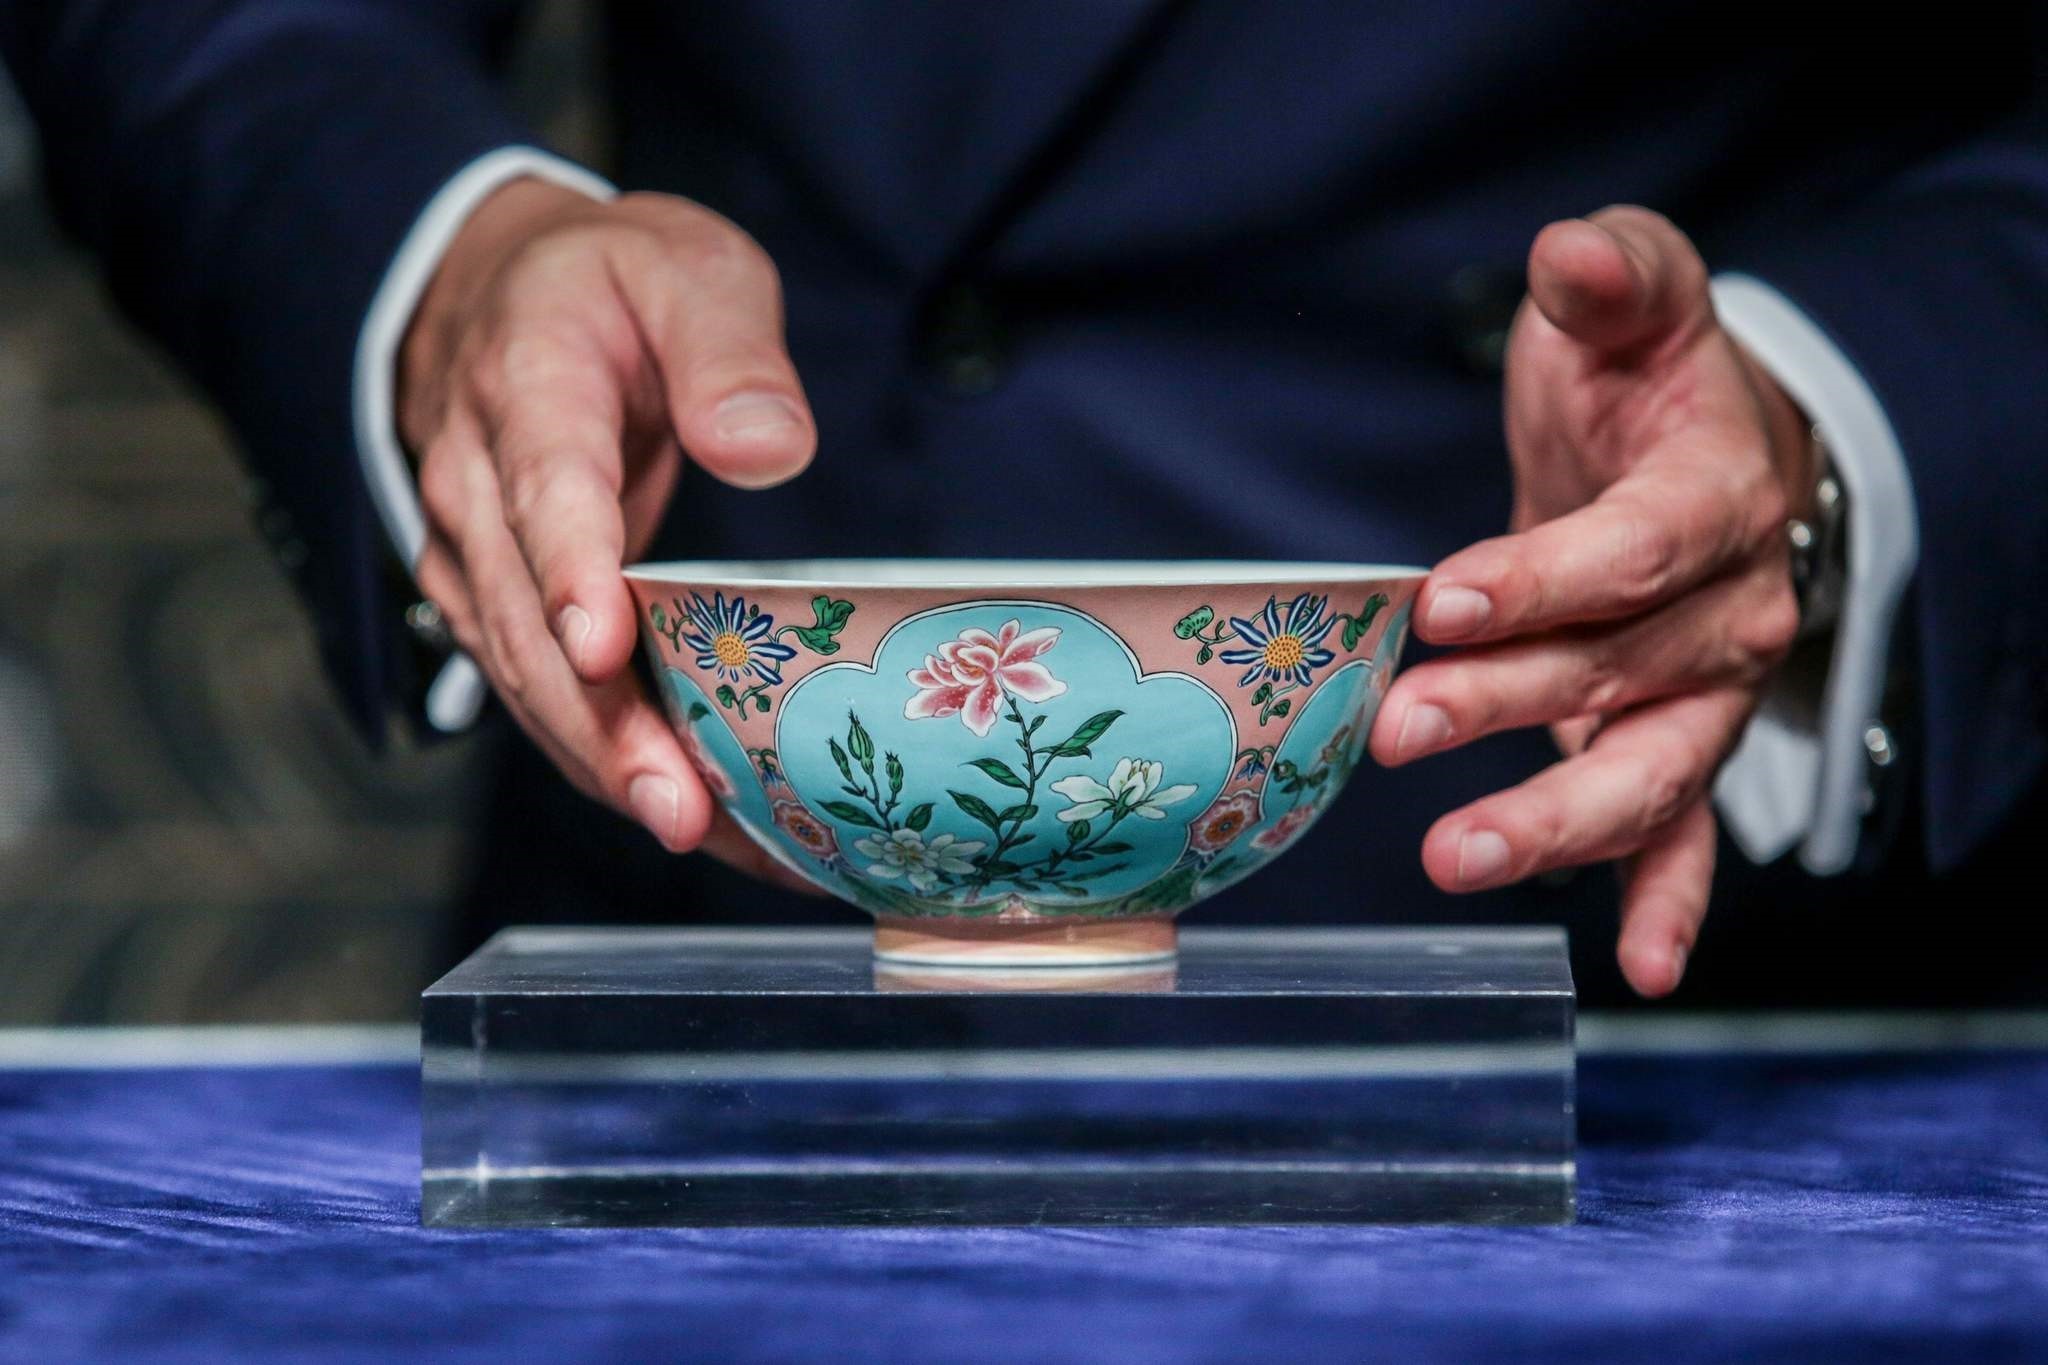 Nicolas Chow, deputy chairman for Sotheby's Asia, holds an extremely rare Qing Dynasty bowl -- one of only three known to exist -- during a media preview at Sotheby's in Hong Kong on April 3, 2018 (AFP Photo)